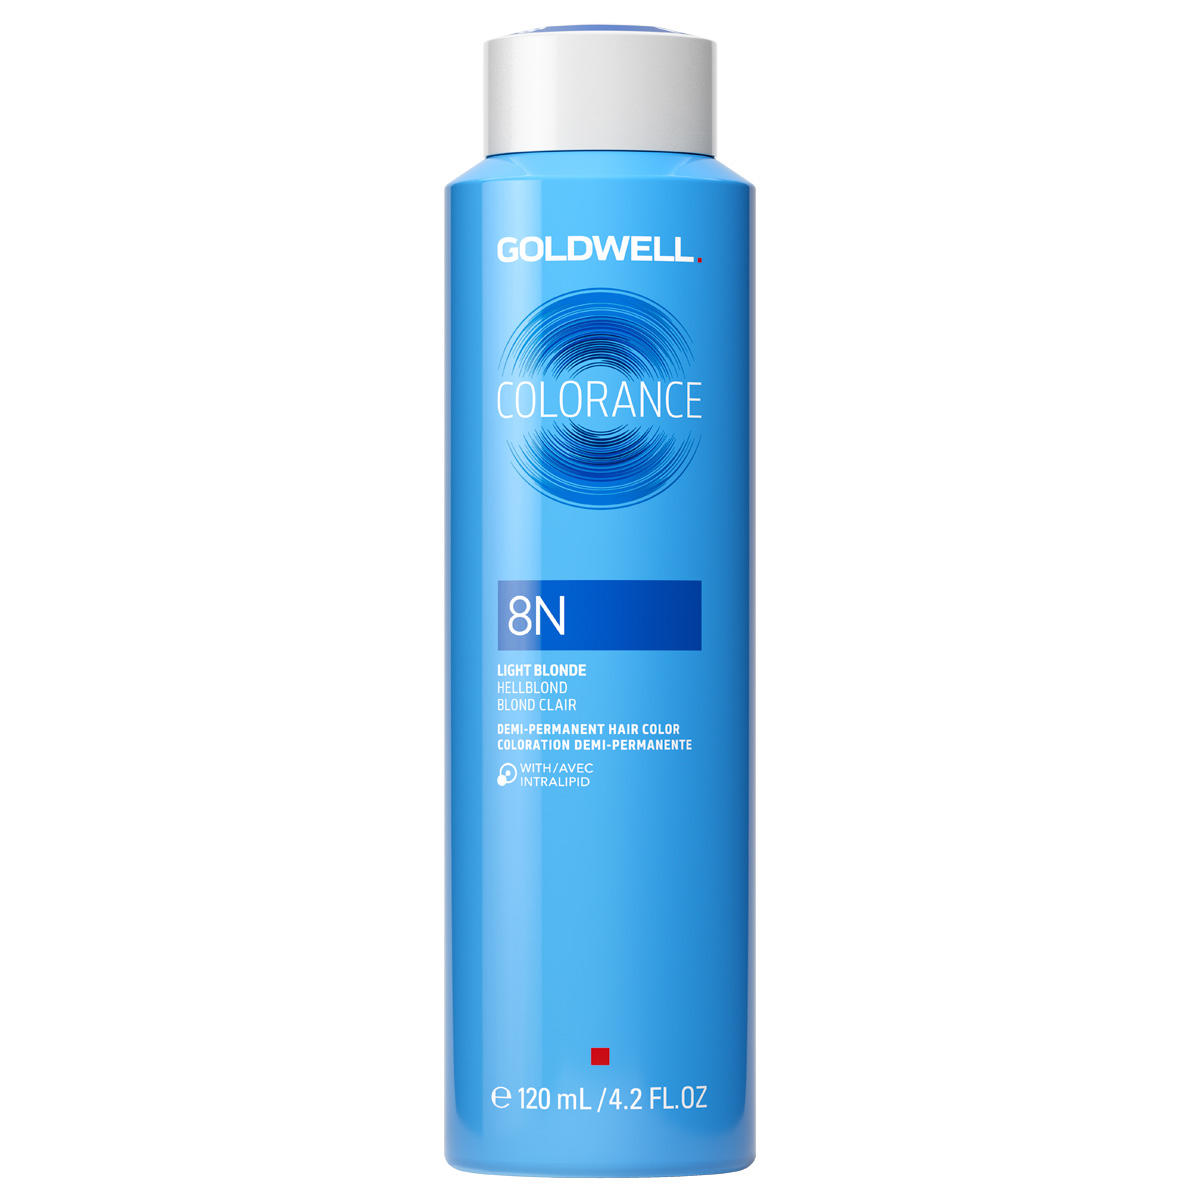 Goldwell Colorance Demi-Permanent Hair Color 8N Licht Blond 120 ml - 1